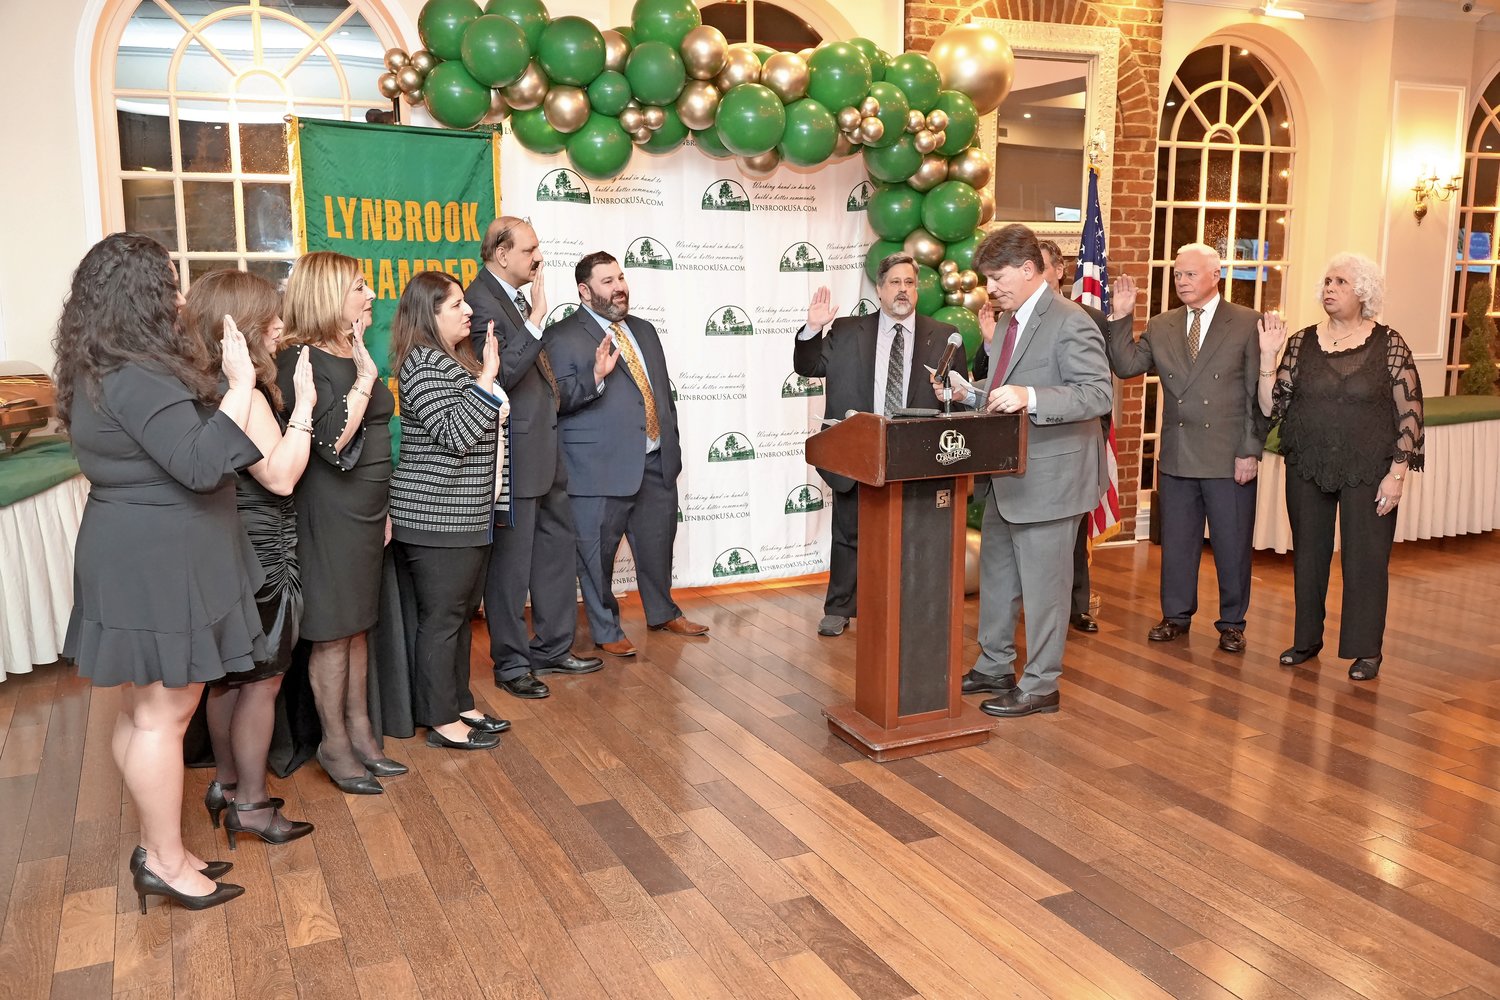 Board of Directors of the Lynbrook Chamber of Commerce AnnMarie Lubrano, left, Melissa Matassa, Rhonda Glickman, Denise Rogers, Shirish Mohile, Cory Hirsch, Steven Wangel being sworn in as executive director by Robert Boccio, Harold Reese and Eleanor Jogbaggy.